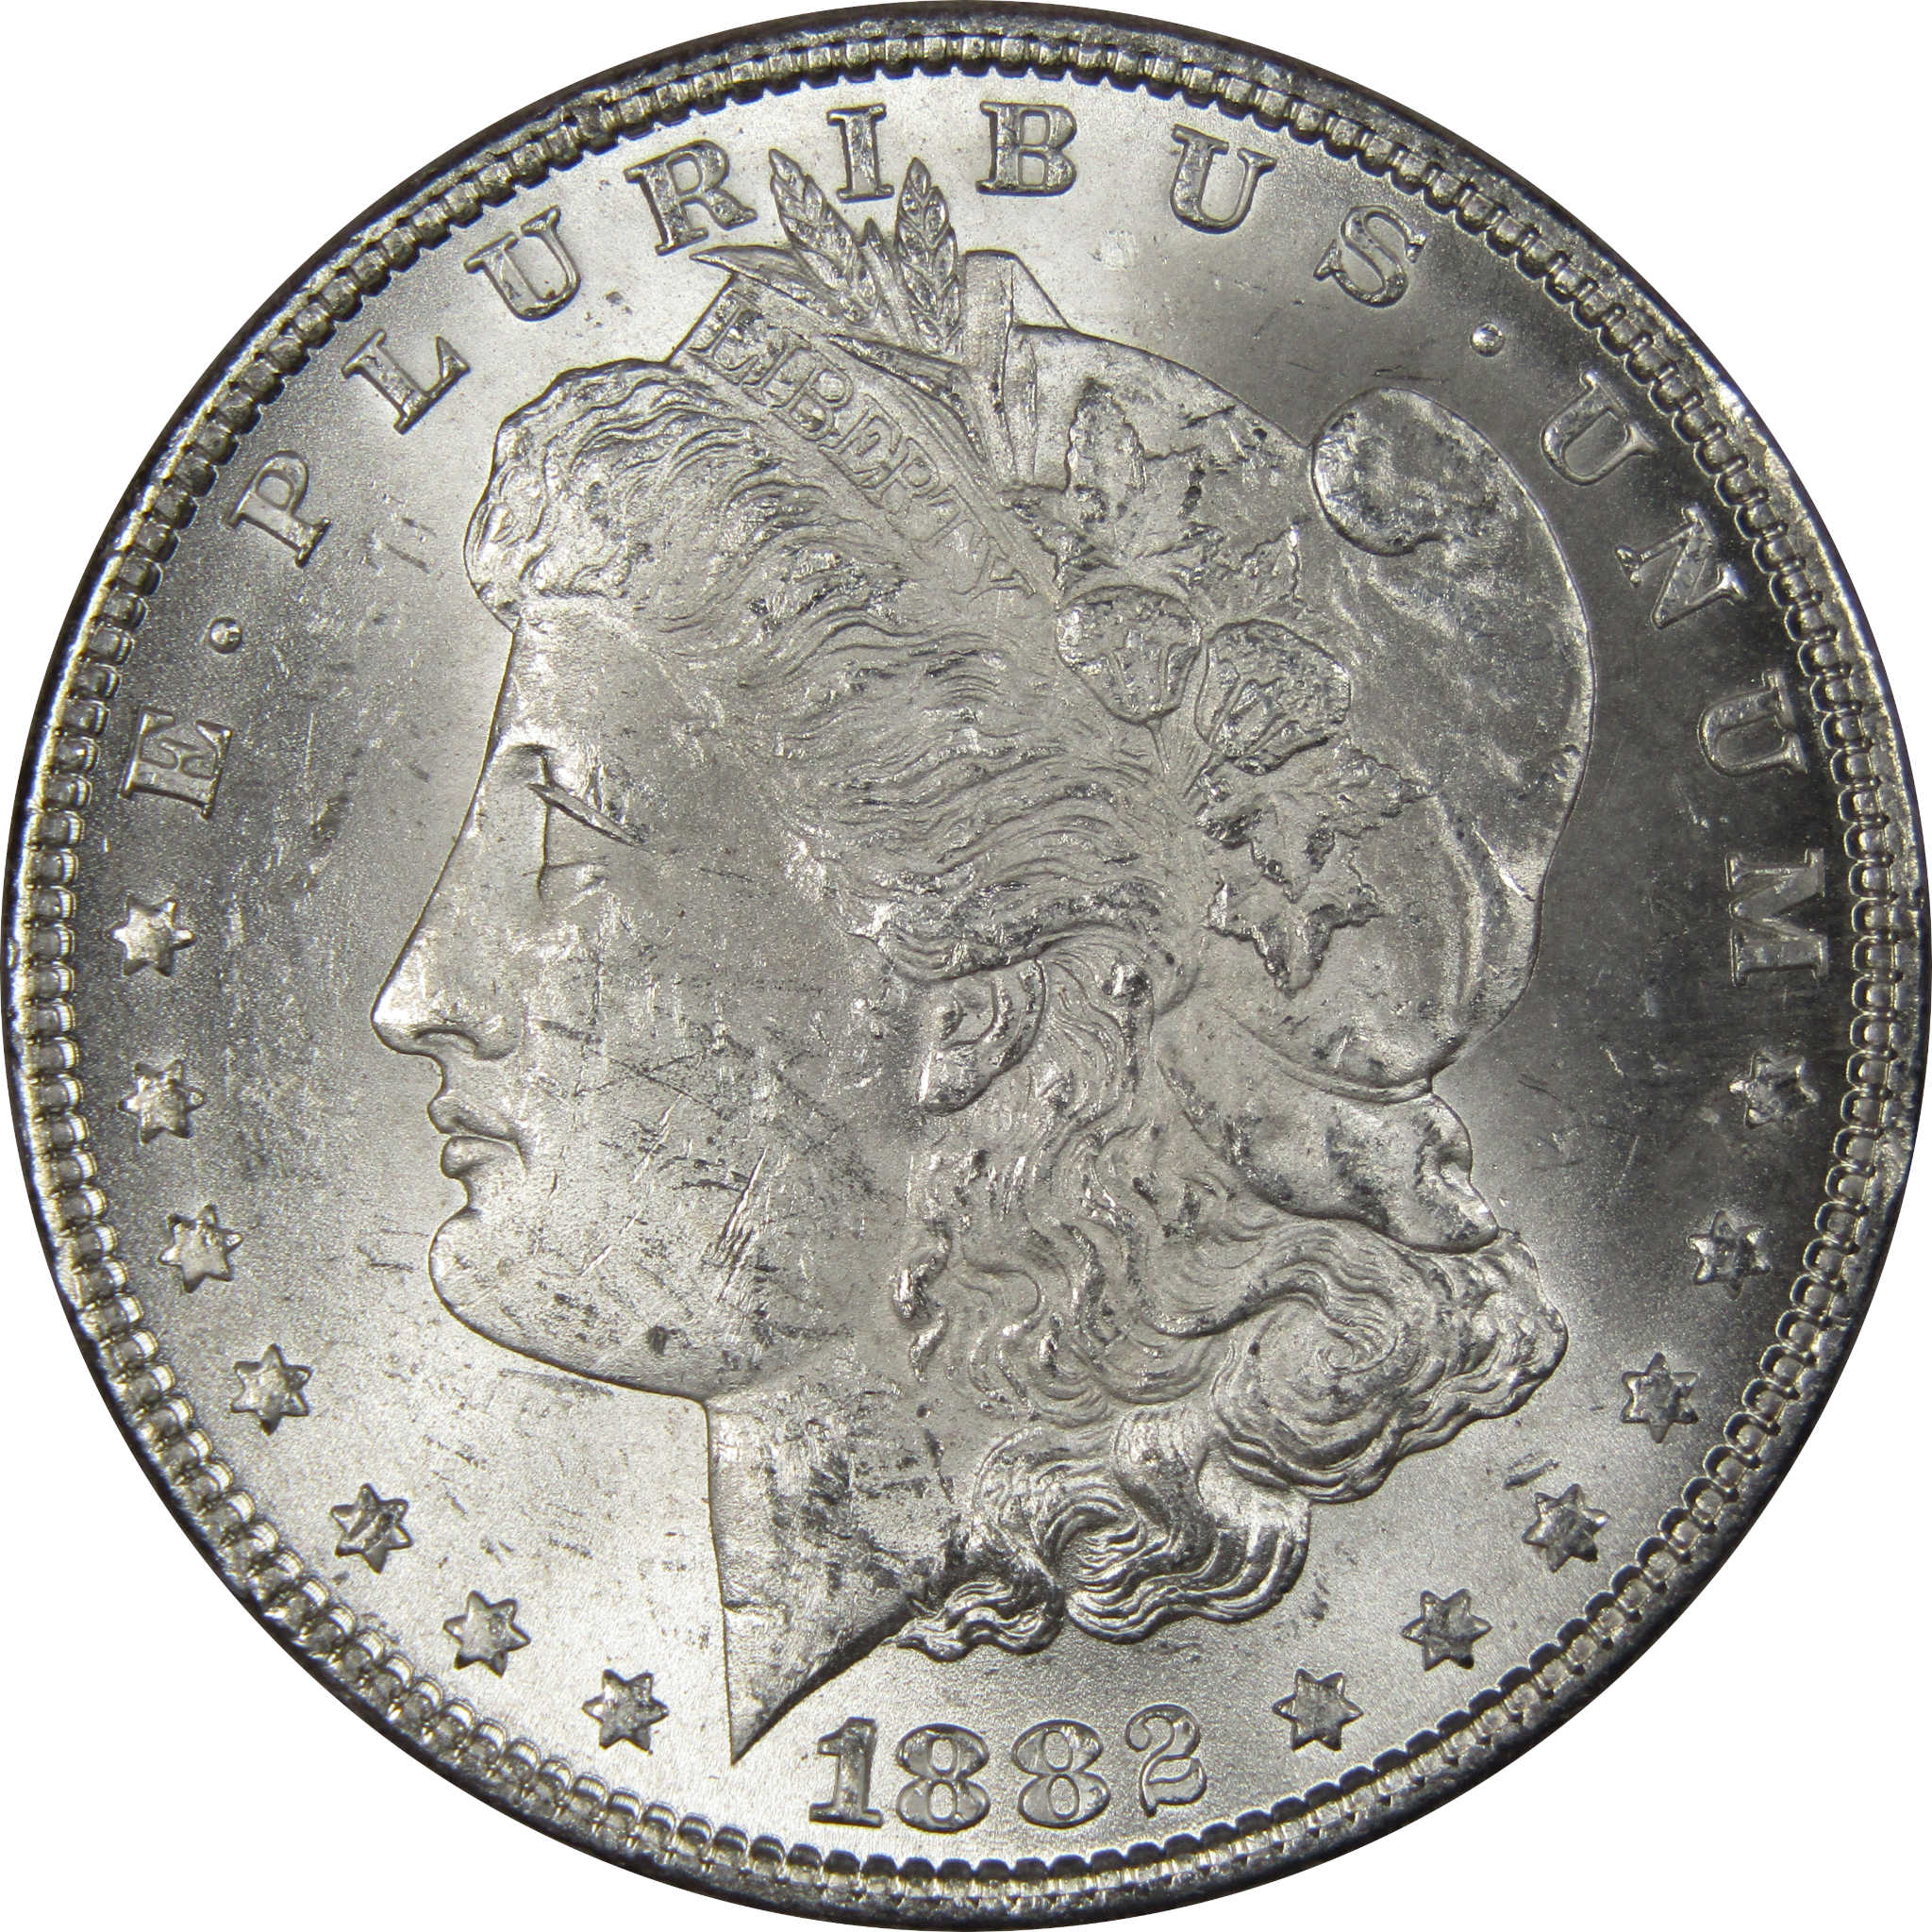 1882 Morgan Dollar BU Uncirculated Mint State 90% Silver SKU:IPC9718 - Morgan coin - Morgan silver dollar - Morgan silver dollar for sale - Profile Coins &amp; Collectibles